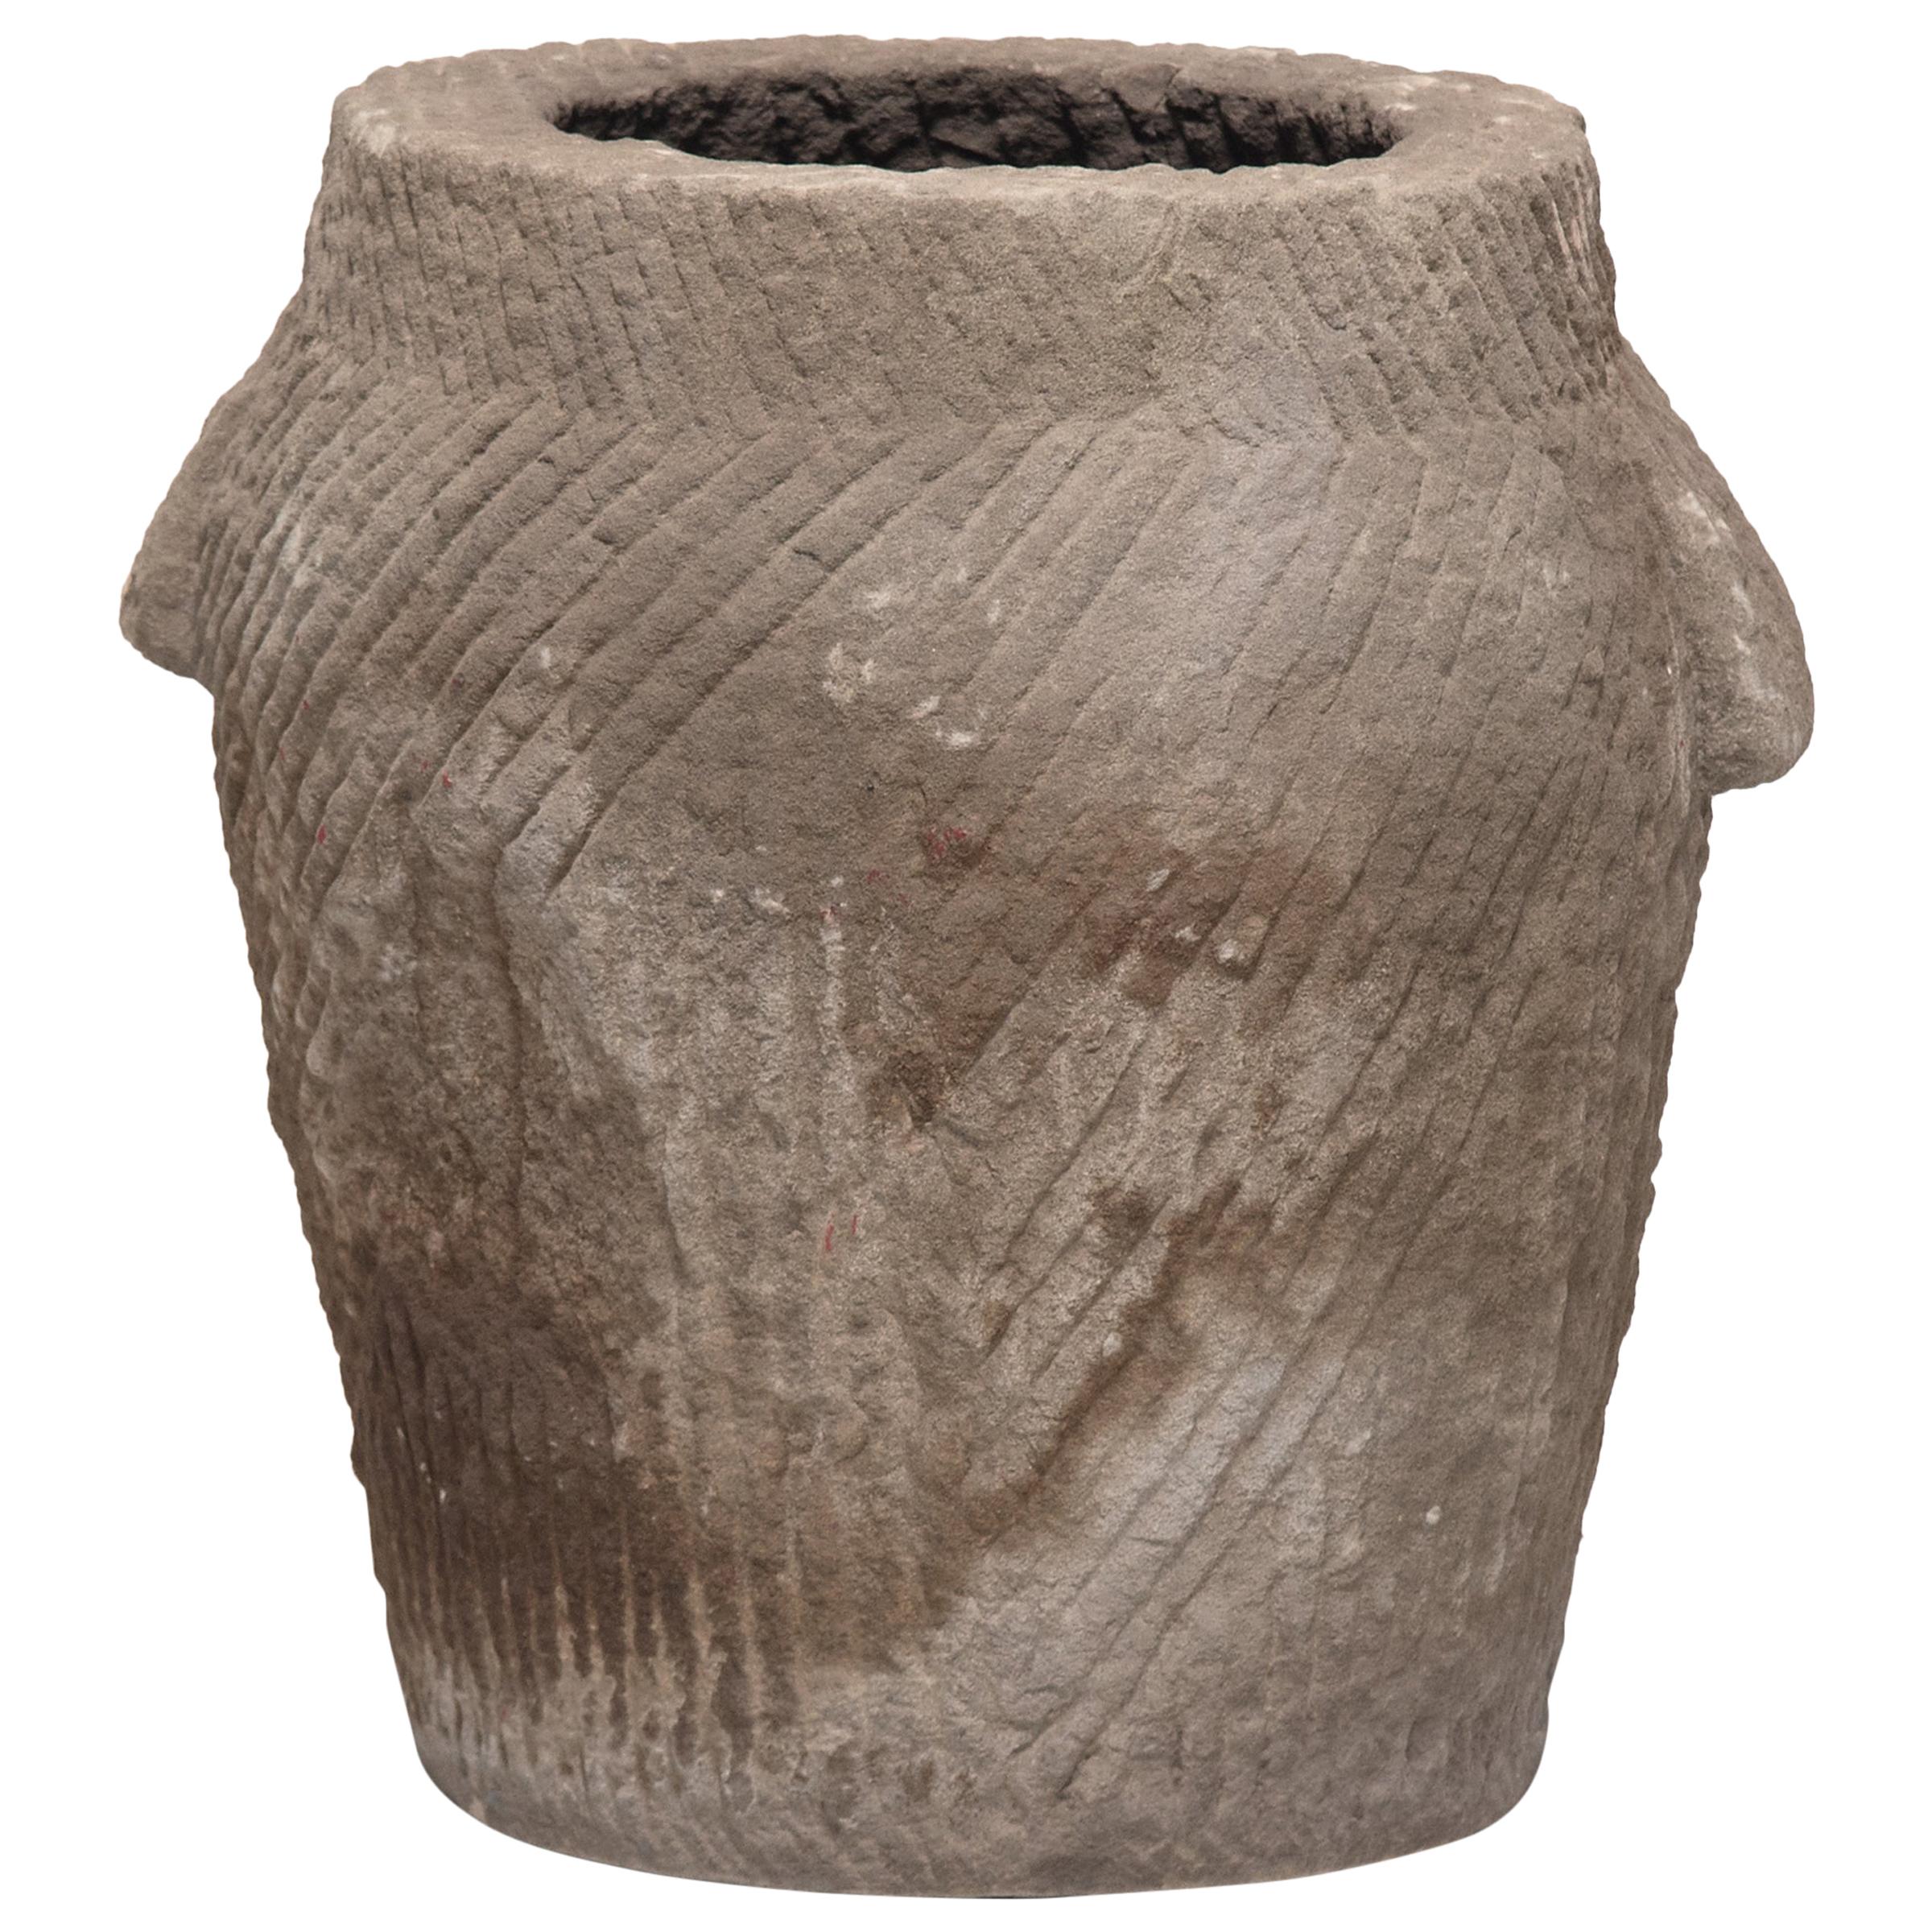 Chinese Etched Stone Mortar, circa 1850